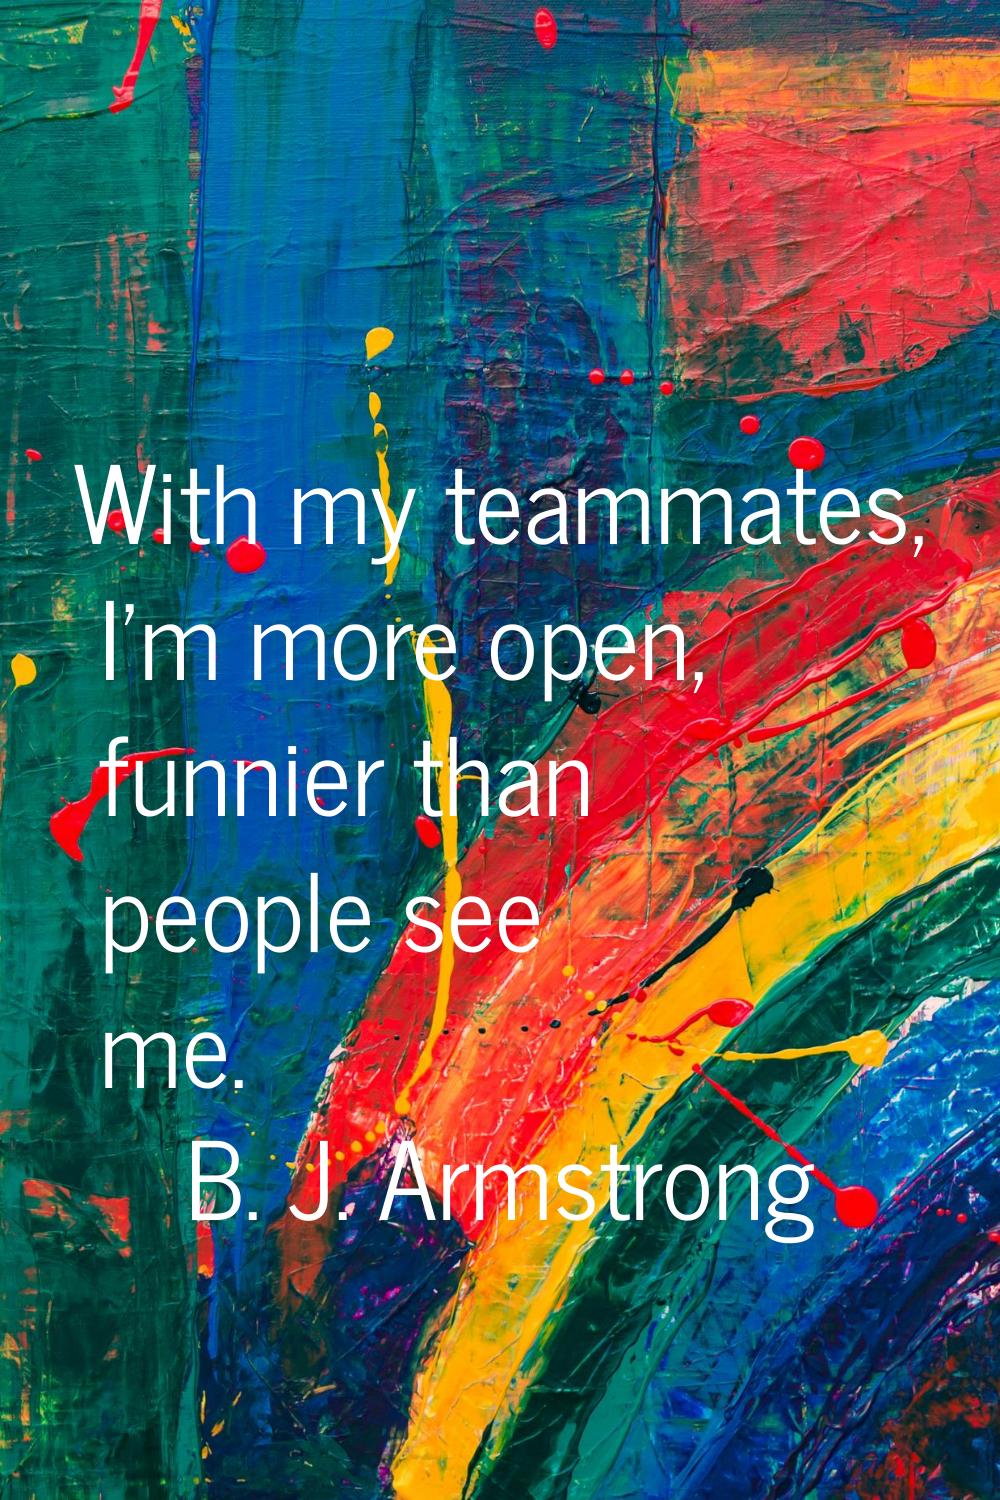 With my teammates, I'm more open, funnier than people see me.